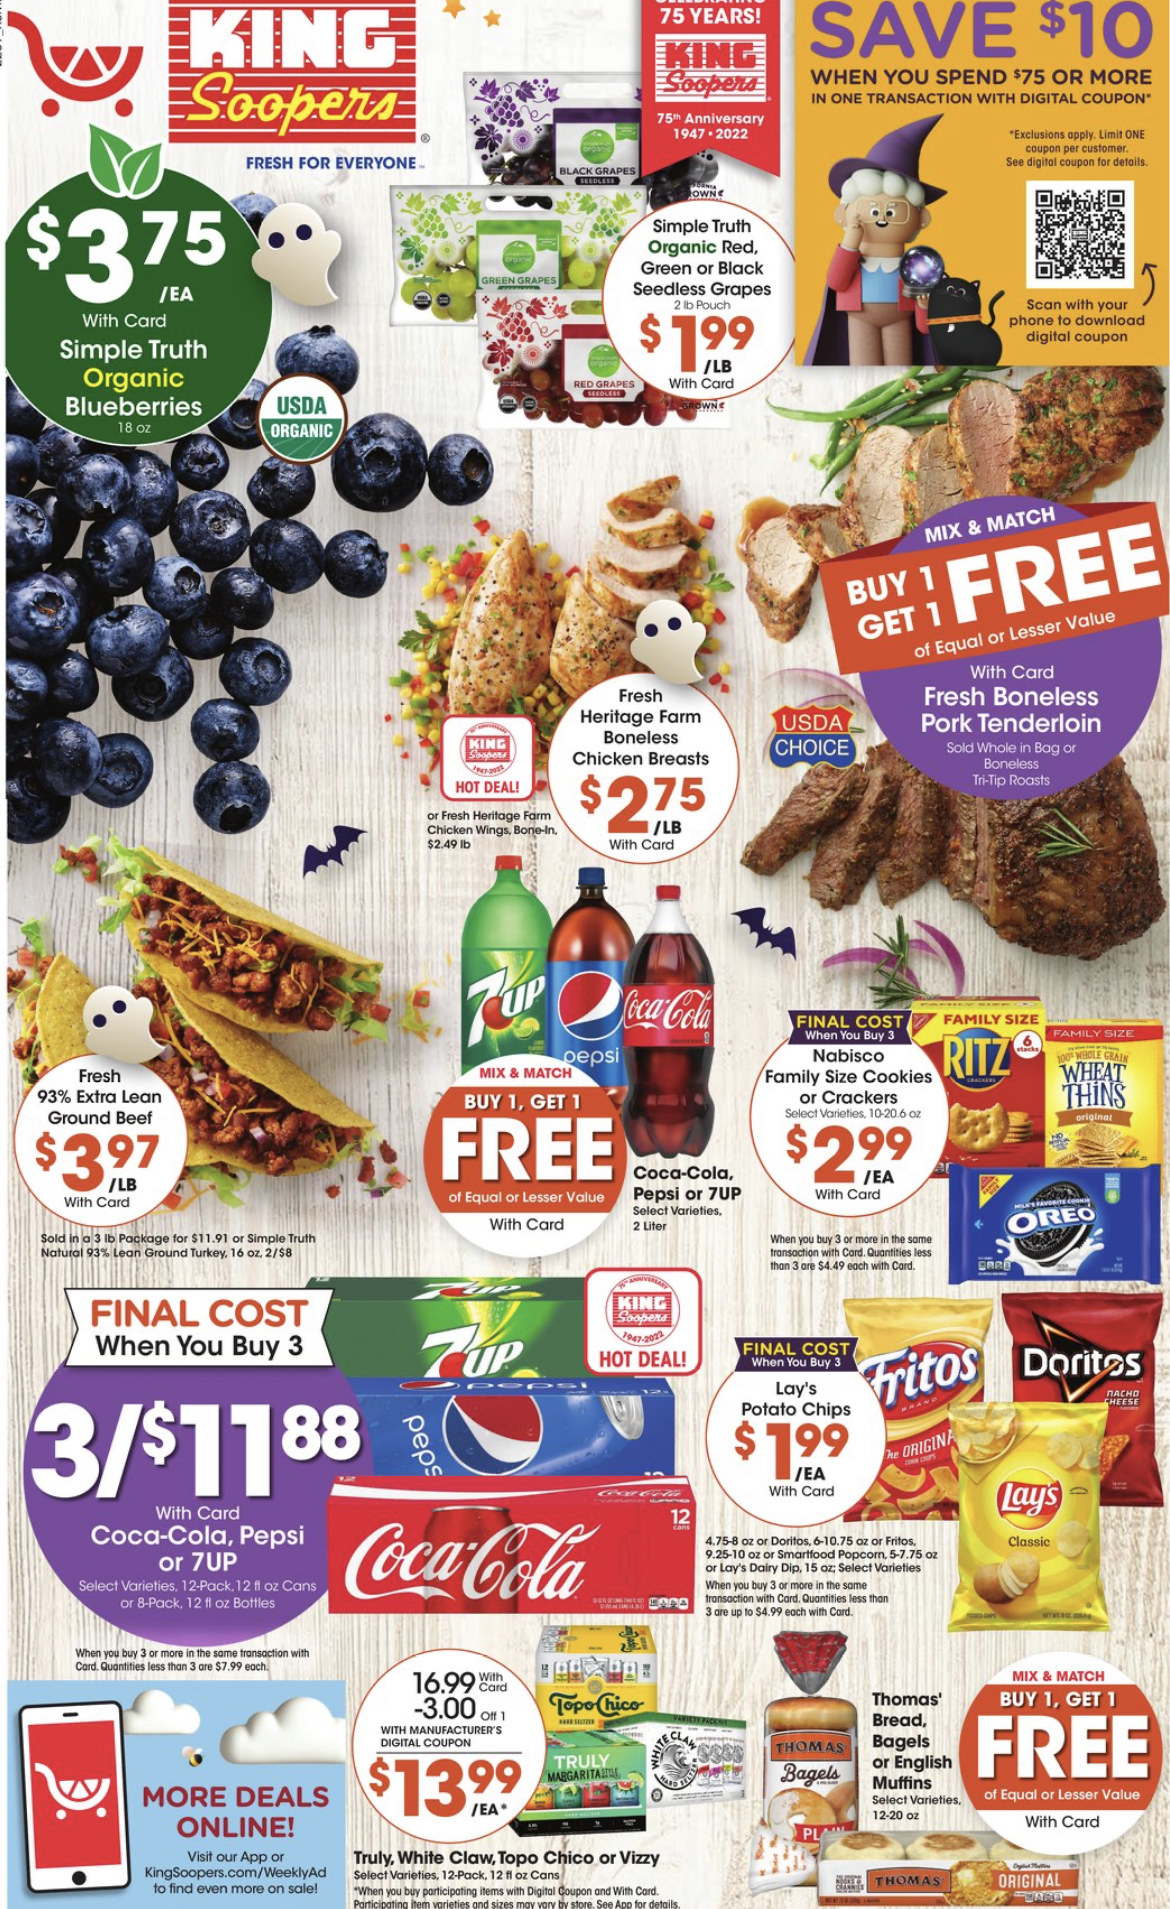 A grocery store sales flyer